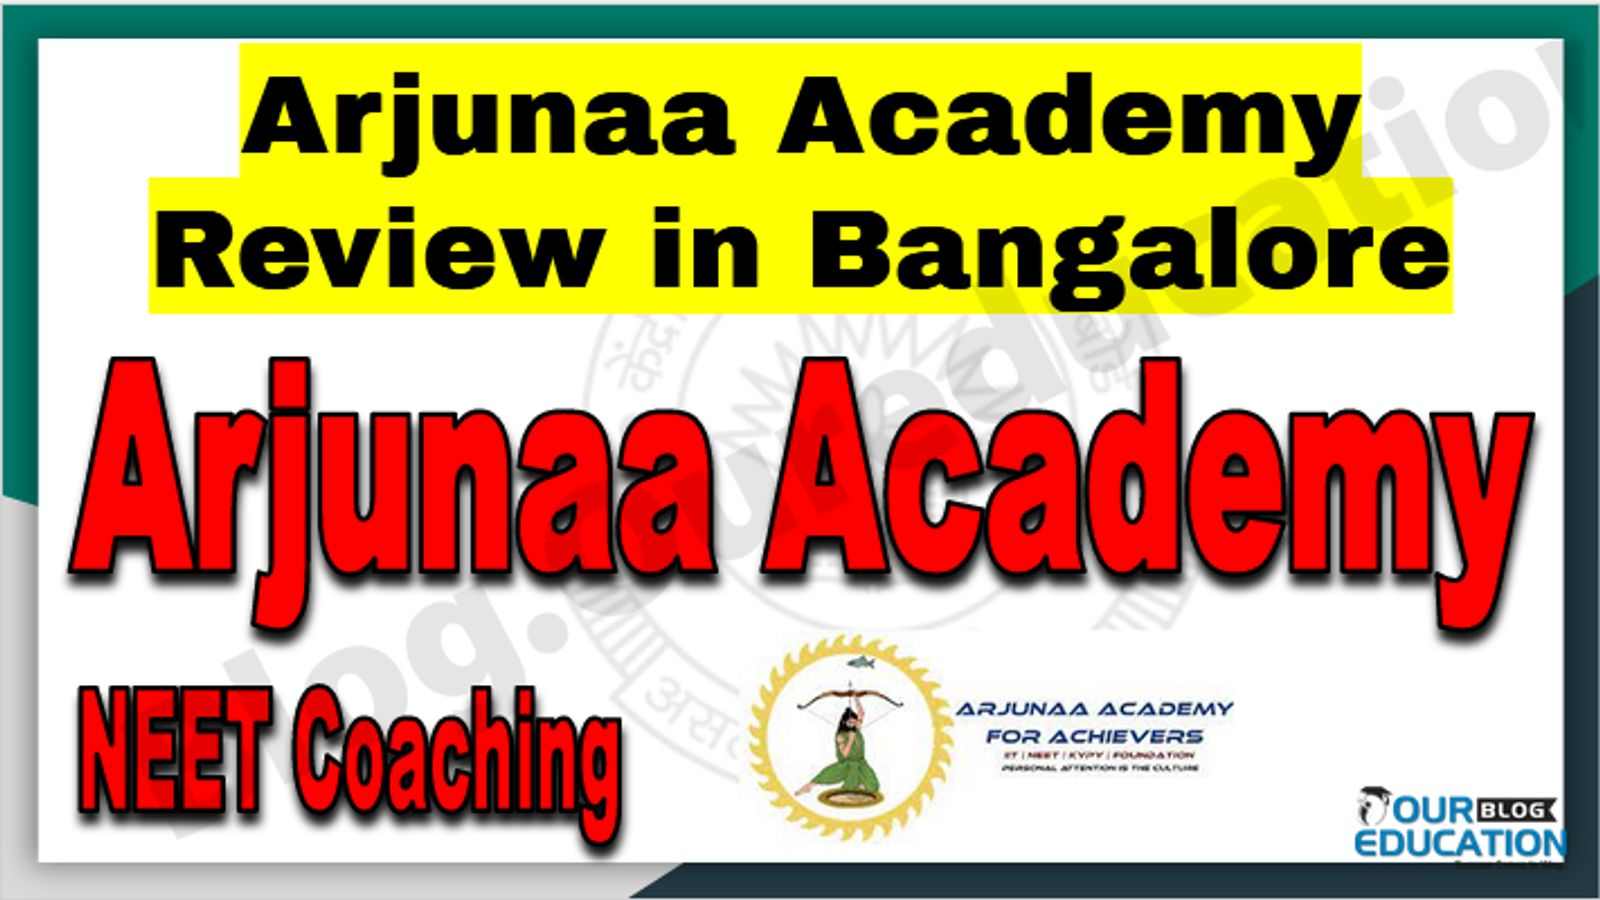 Arjunaa Academy Review in Bangalore